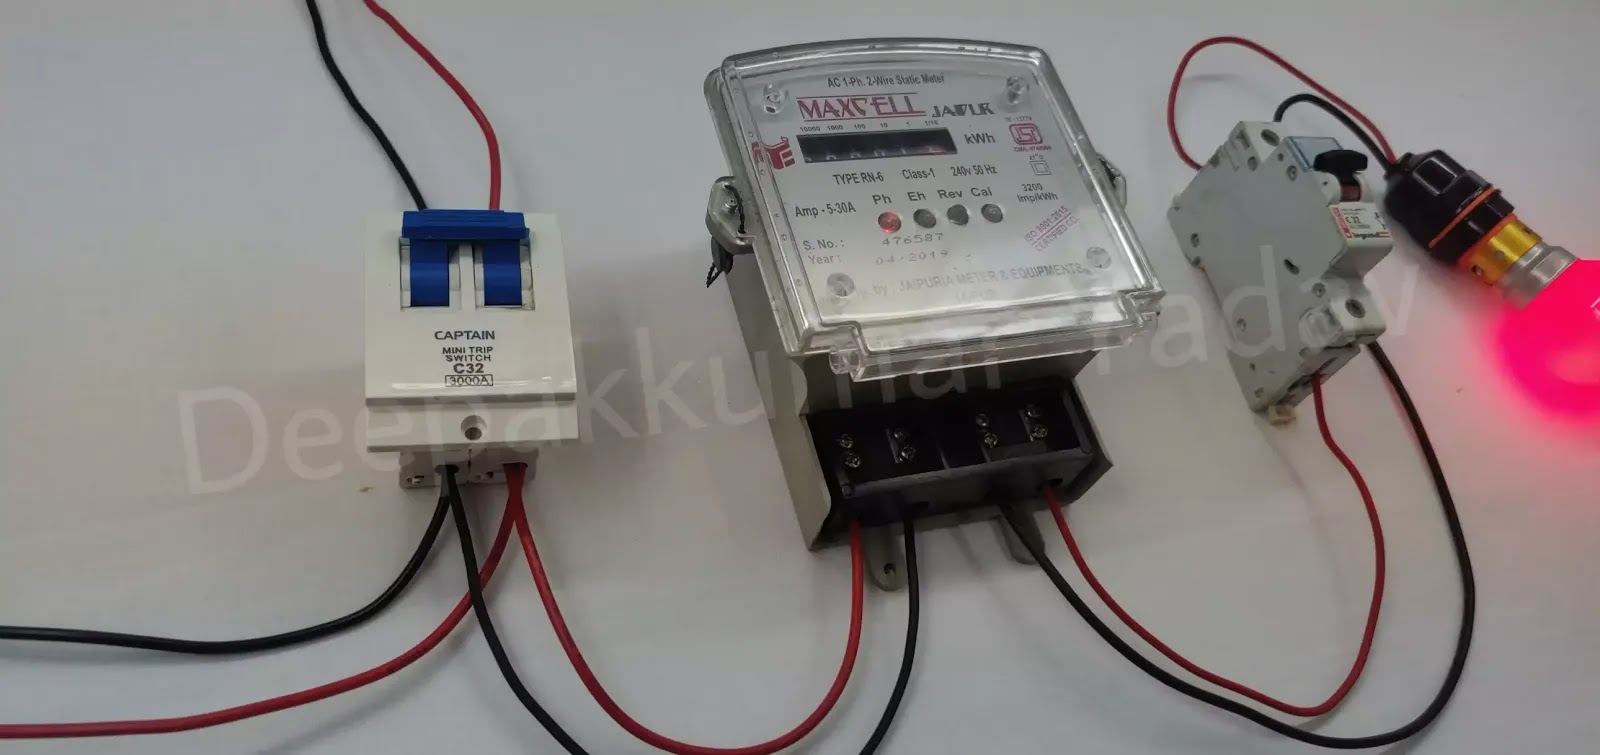 How To Install Electric Sub Meter Wiring Connection Of Submeter Use Of Submeter In Hindi